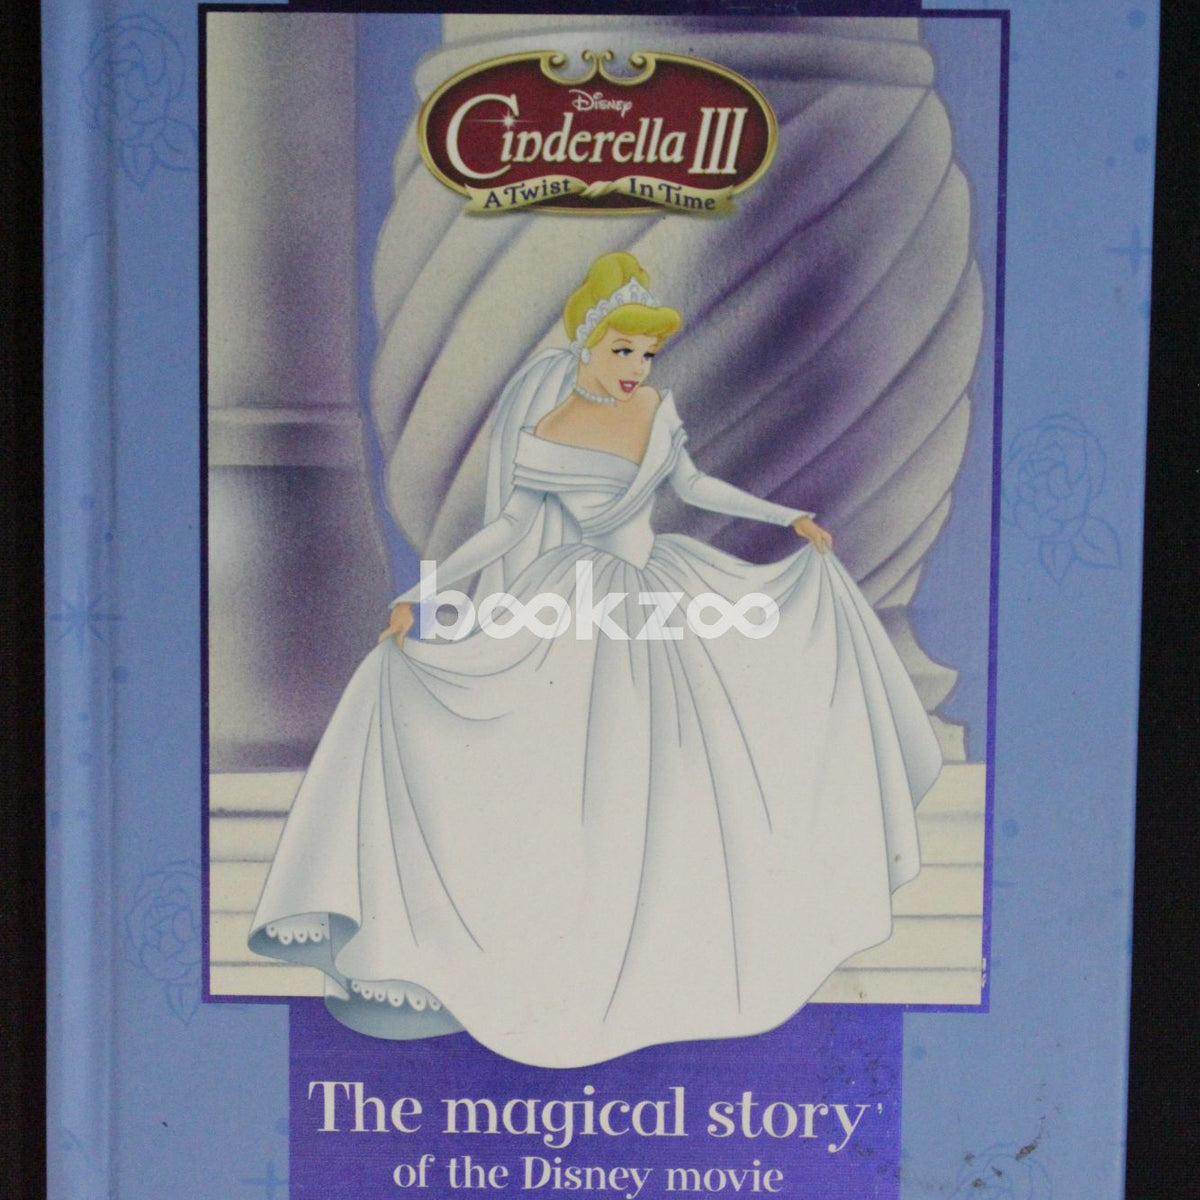 Buy Disney:Cinderella III: A twist in time by Melissa Arps at ...